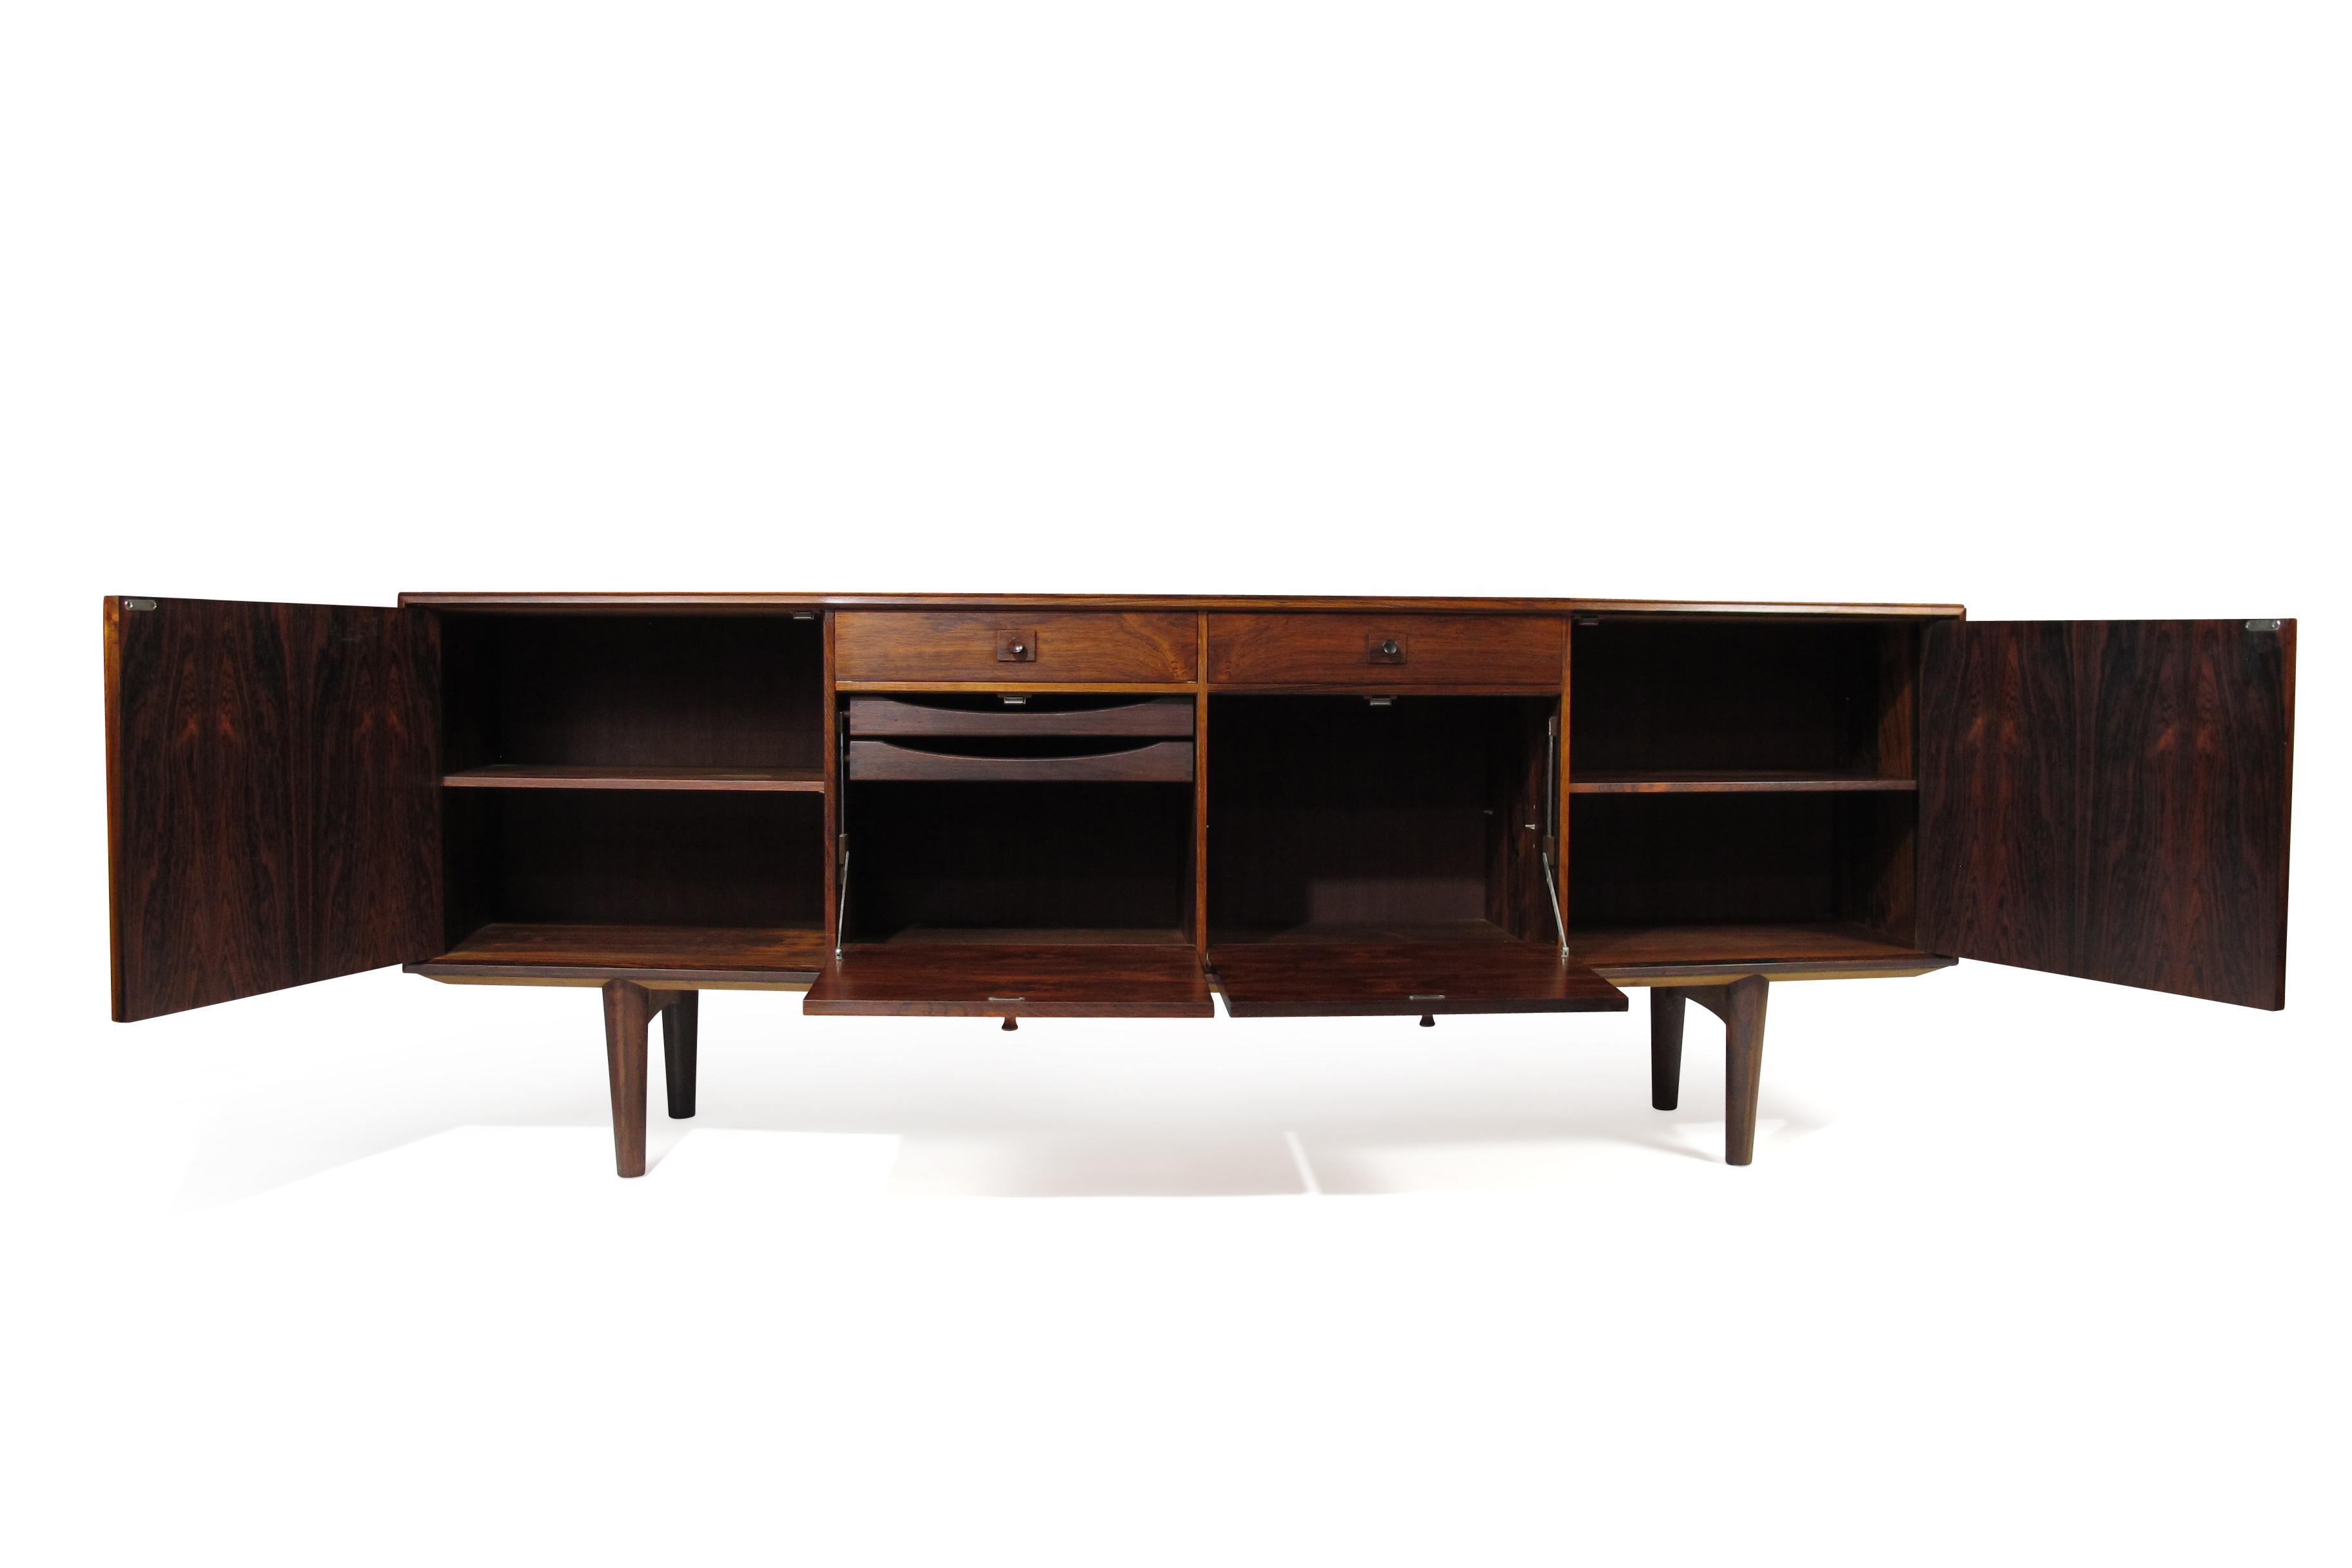 Handcrafted Brazilian rosewood credenza with angled front and bookmatched grain. The sideboard features two doors with adjustable interior shelves, and center section with two drawers over a pair of drop front cabinets with interior silverware